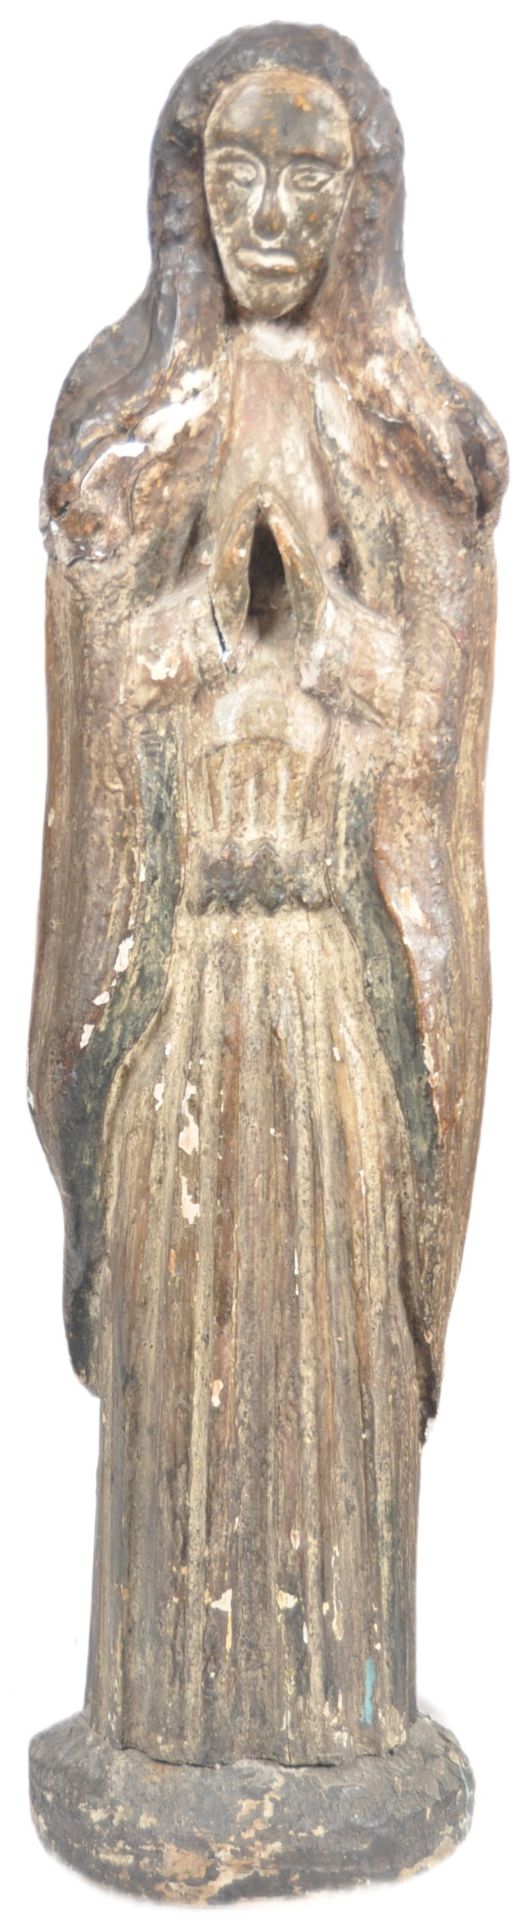 17TH CENTURY CARVED OAK FIGURE OF A RELGIOUS FIGURE